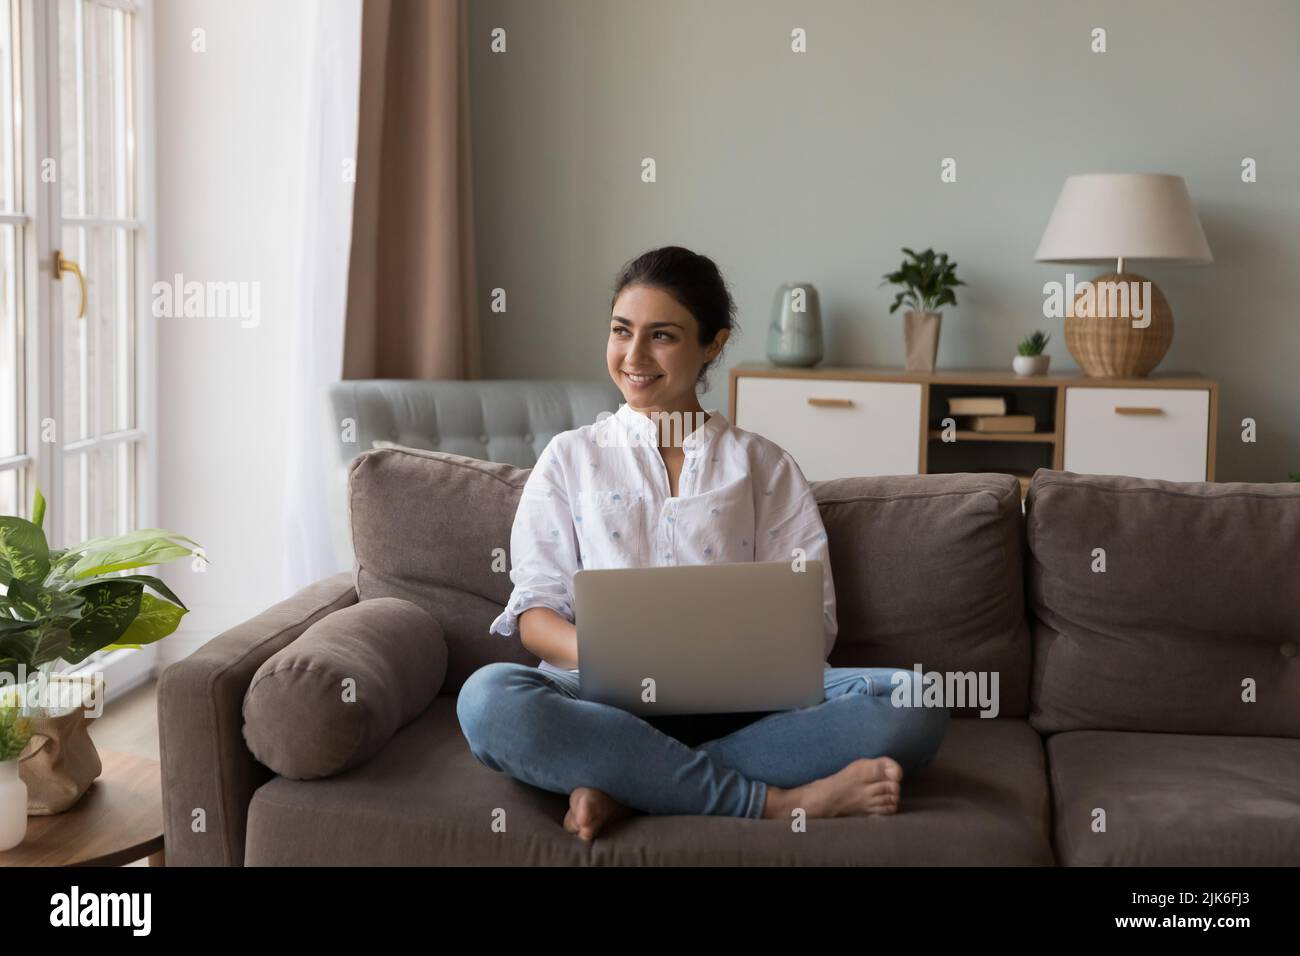 Cheerful happy Indian woman holding laptop, sitting on comfortable couch Stock Photo